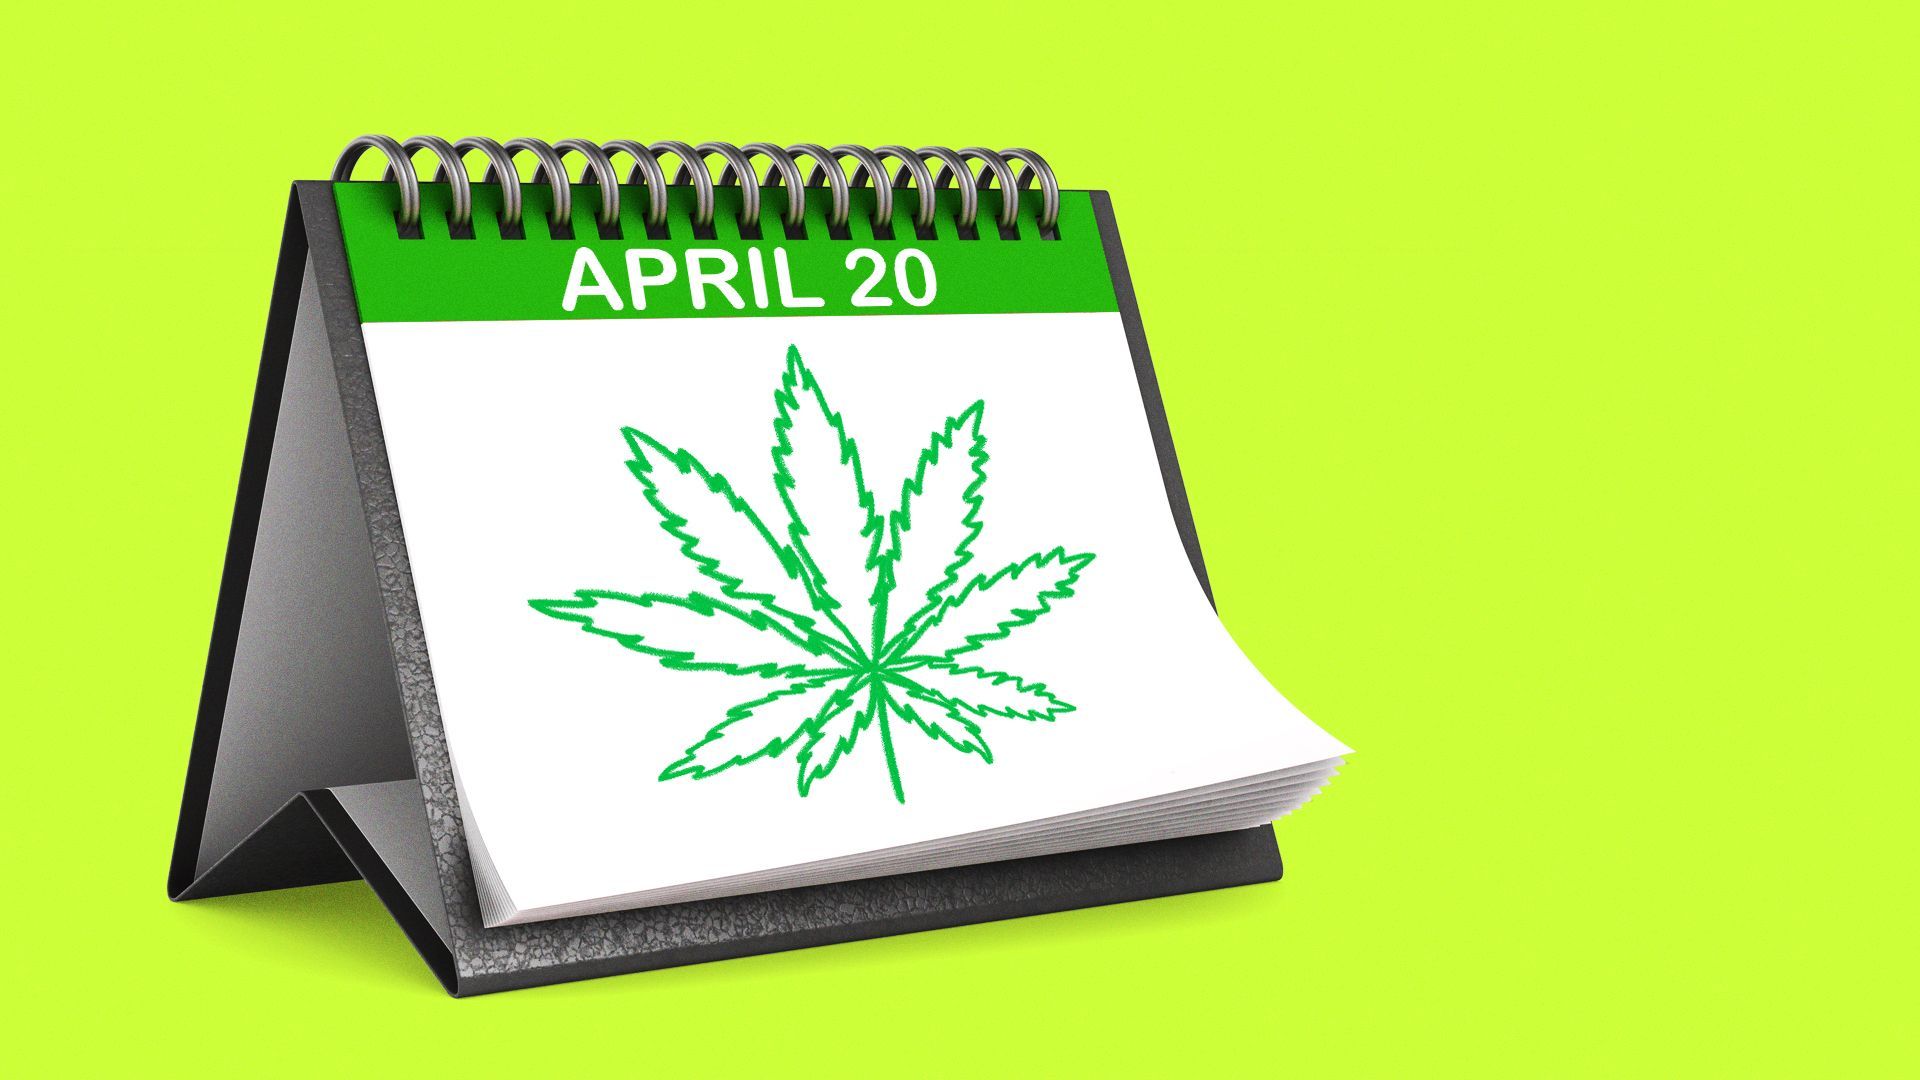 Illustration of a calendar flipped to April 20, with a marijuana leaf drawn on.